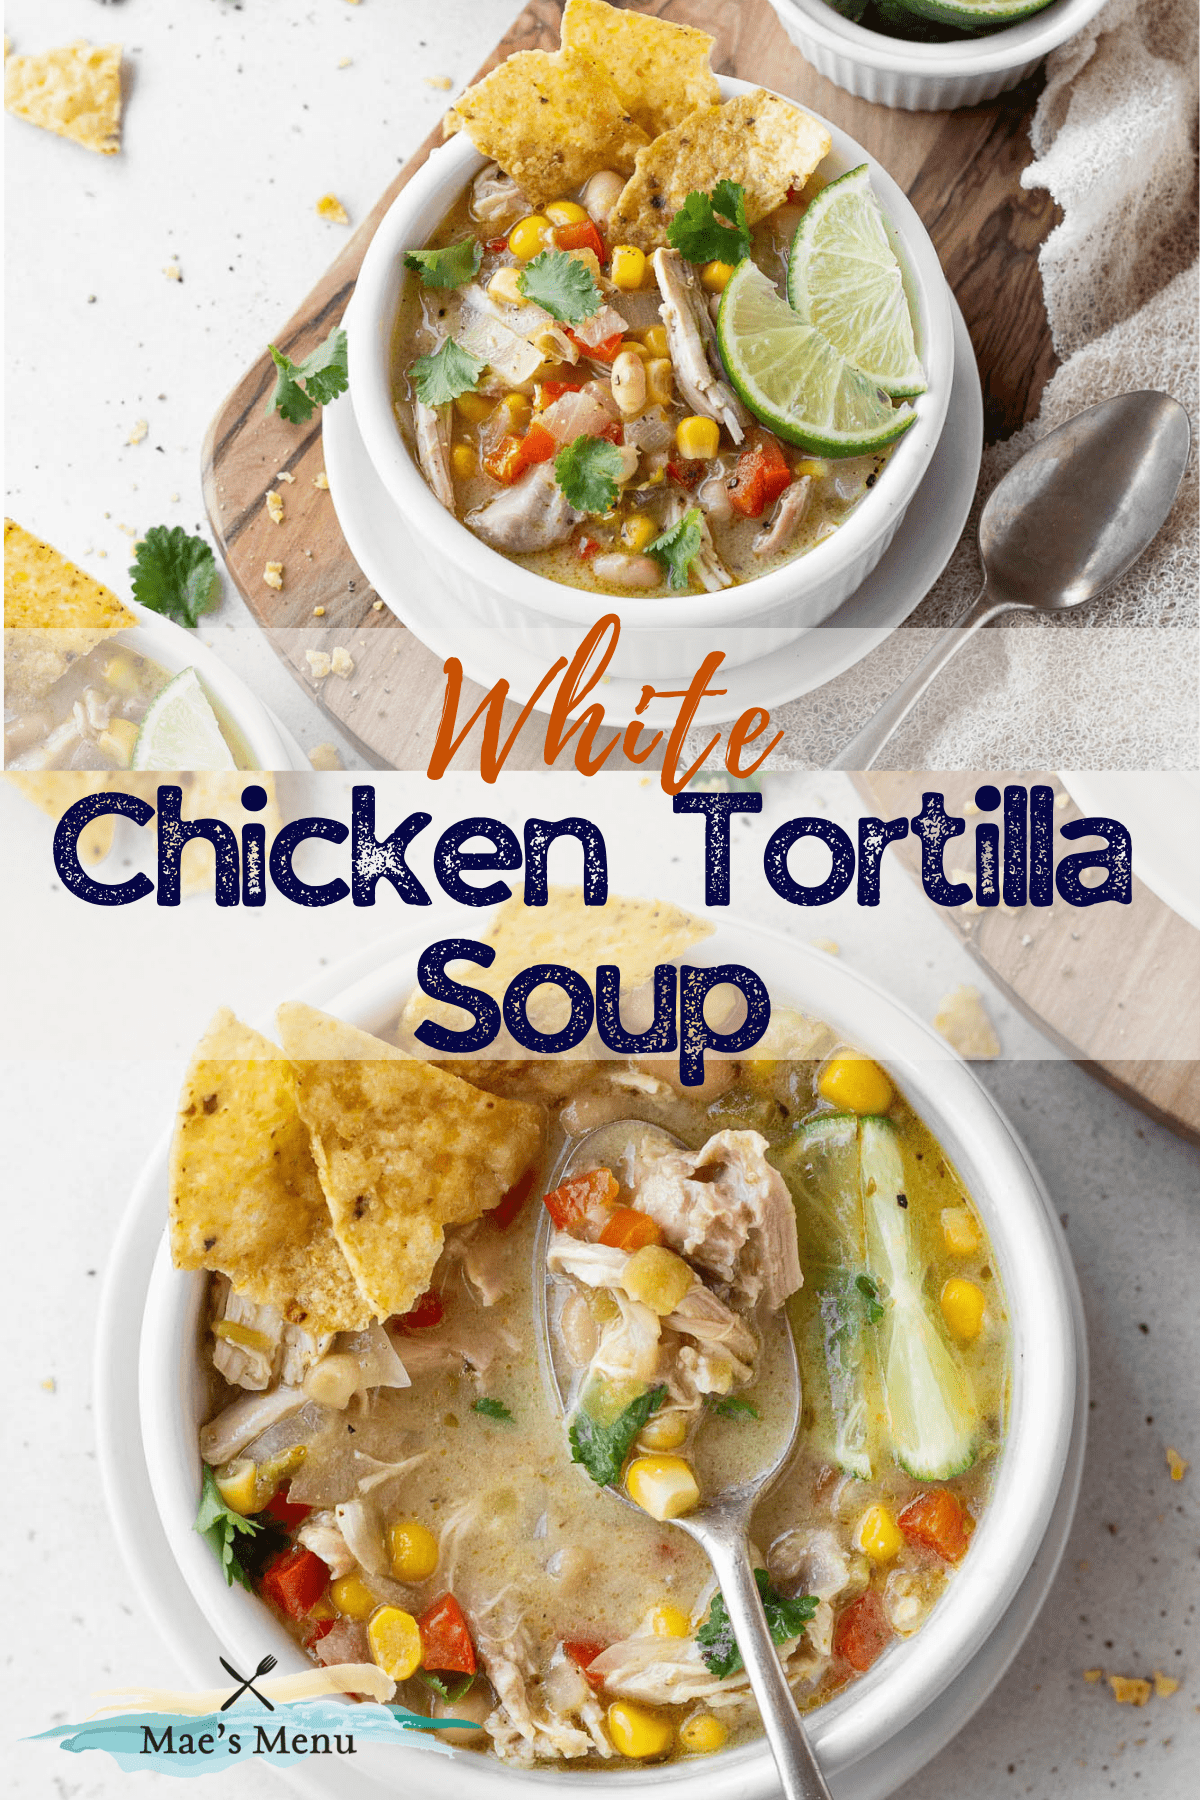 A pinterest pin for white chicken tortilla soup with two shots of small bowls of the soup.